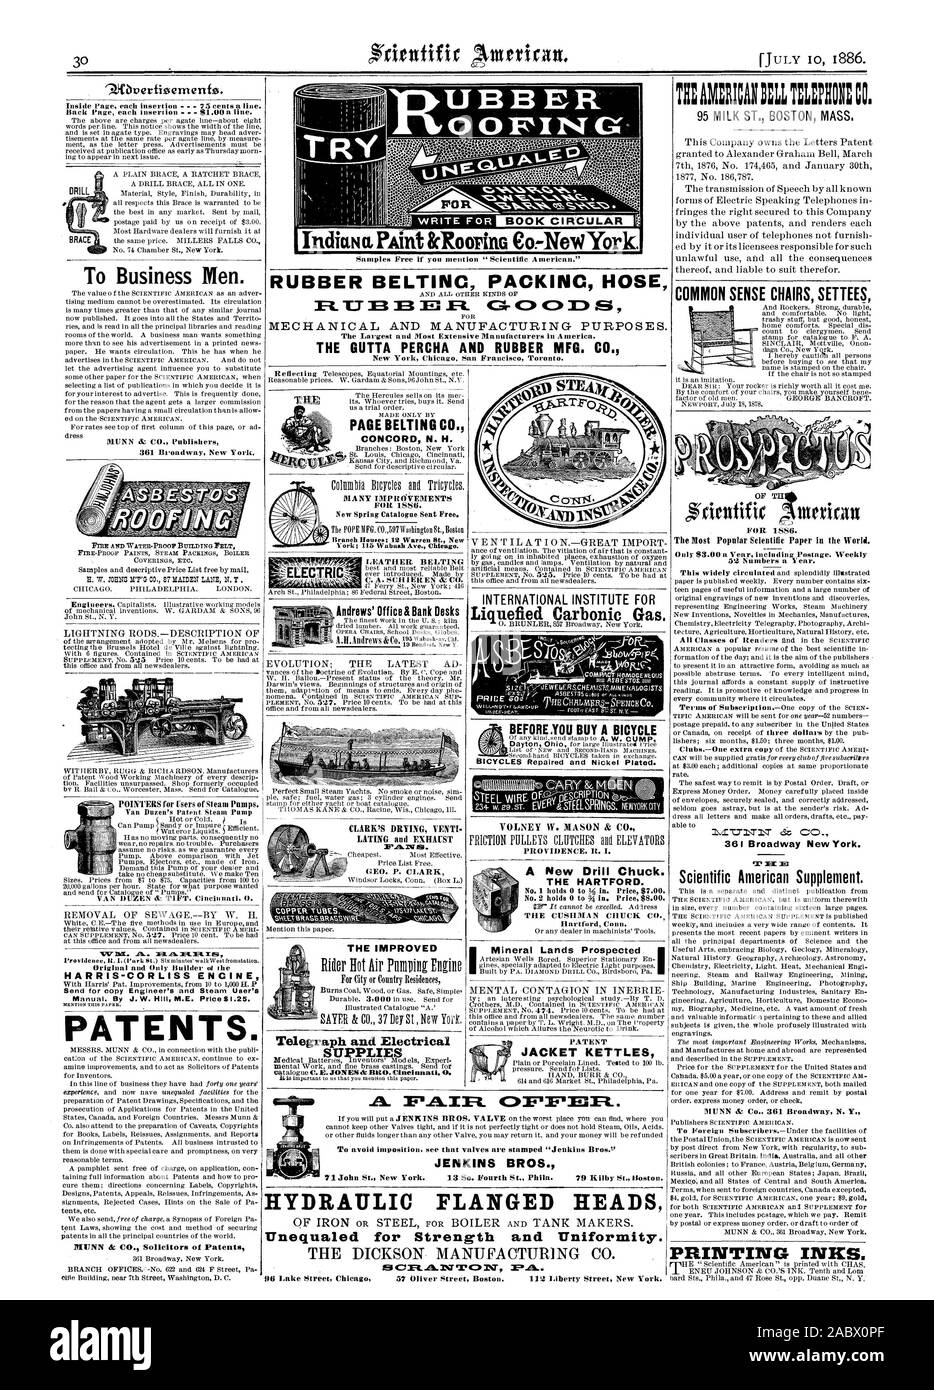 RUBBER BELTINC PACKING HOSE The Largest and Most Extensive Manufacturers in A merica. THE GUTTA PERCHA AND RUBBER MFG. CO. New York Chicag San Francisc Toronto. Back Page each insertion  - 81.00 a line. To Business Men. MUNN & CO. Publishers 361 Broadway New York. Tan Buzen's Patent Steam Pump Original and Only Builder ni the HARRIS-CORLISS ENGINE Send for copy Engineer's and Steam User's PATENTS. MUNN ik CO. Solicitors of Patents PAGE BELTING CO. CONCORD N. H. MANY IMPROVEMENTS New Spring Catalogue Sent Free. 4frfrAr ELECTRIC Andrews' Office & Bank Desks THE IMPROVED Telegraph and Electrical Stock Photo